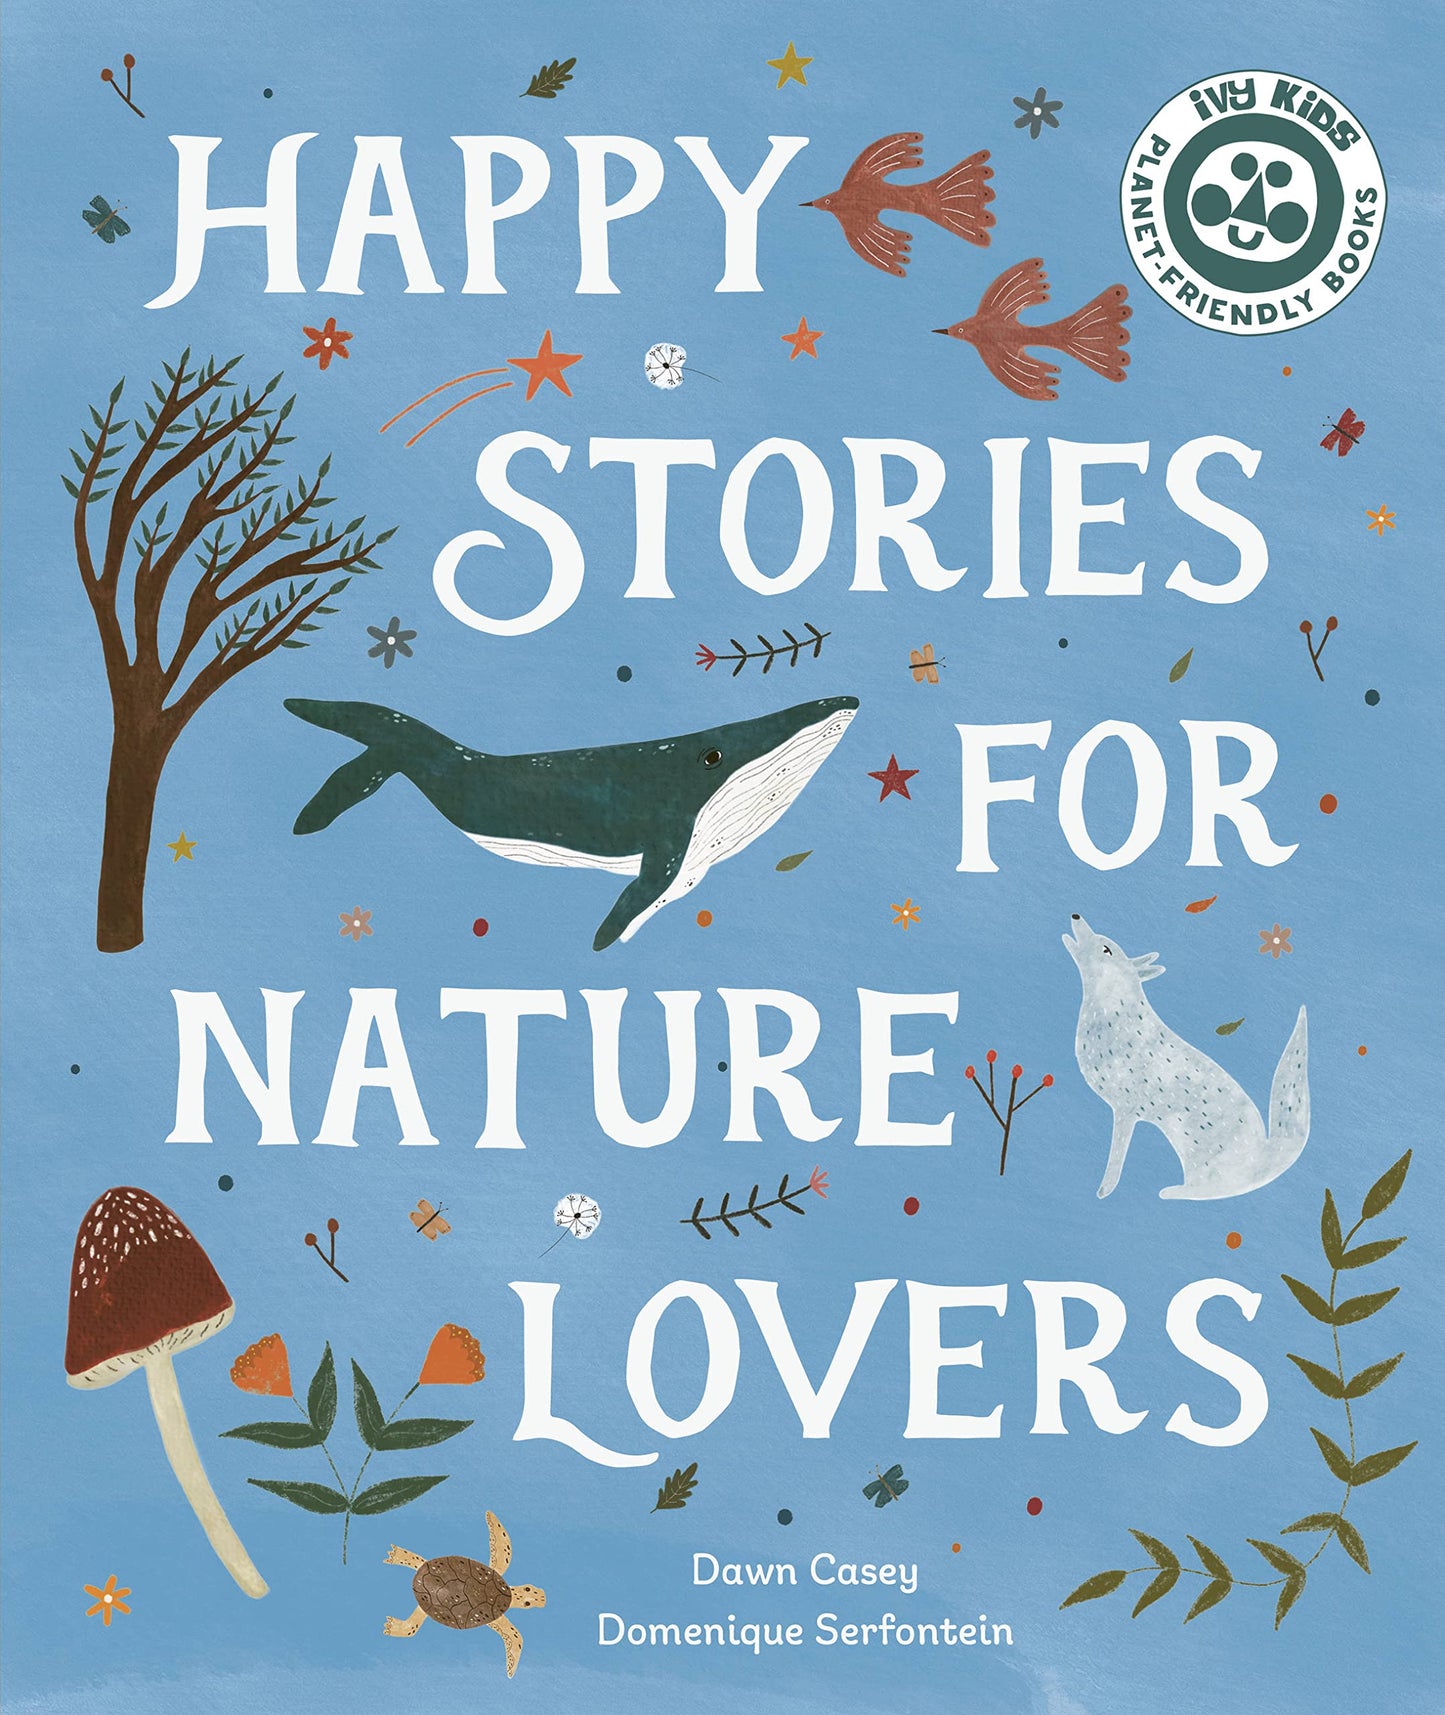 Happy Stories for Nature